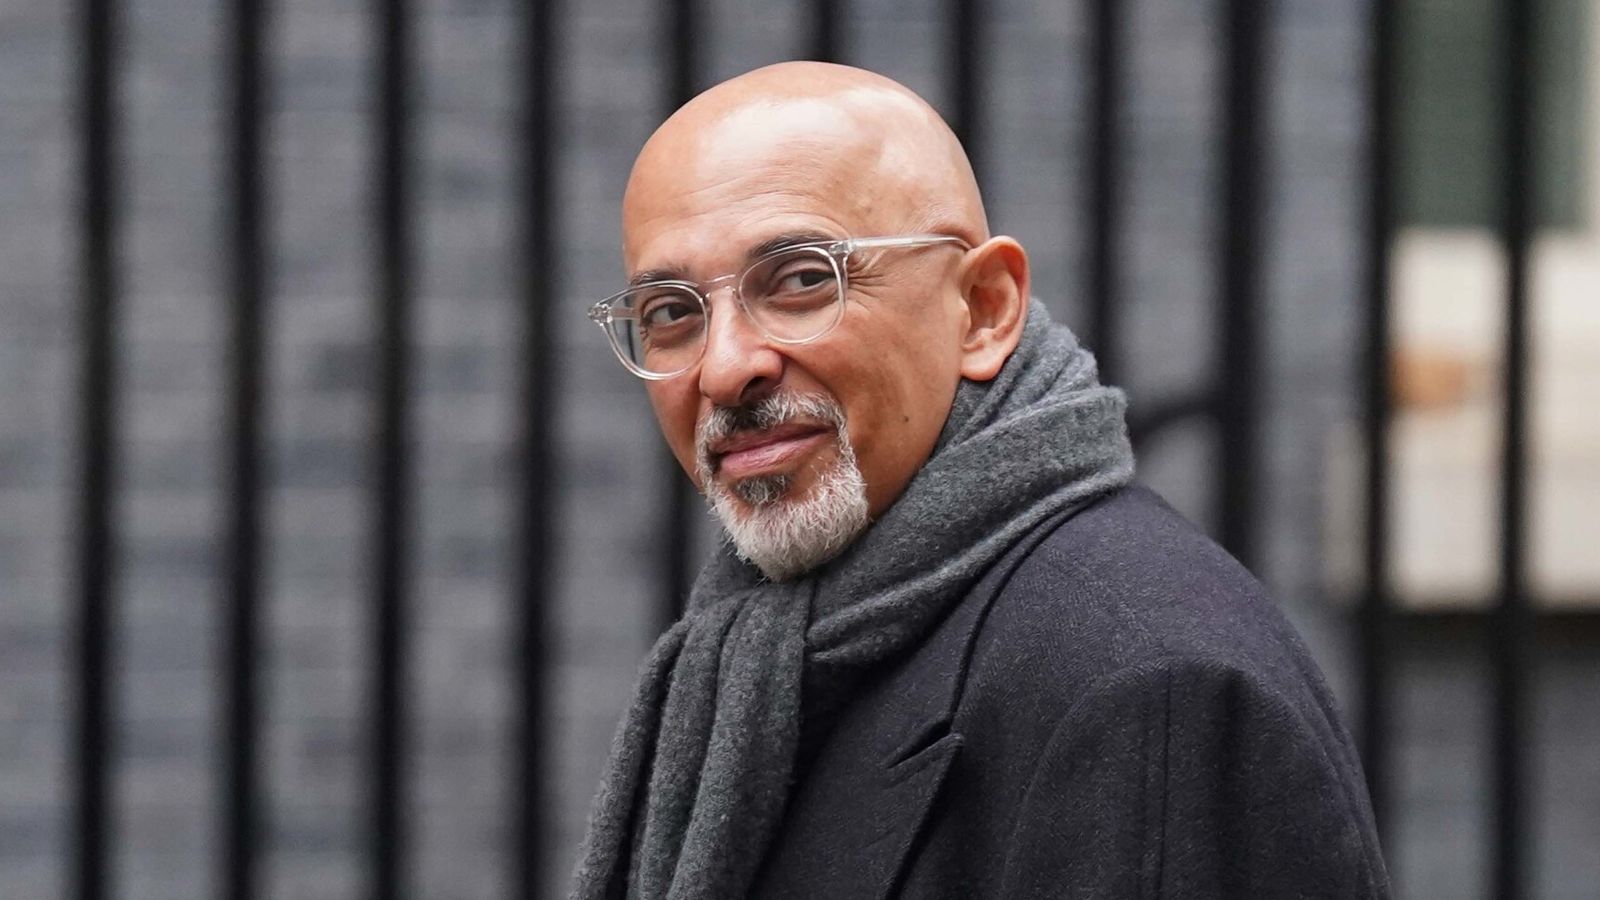 Nadhim Zahawi says tax error was 'careless and not deliberate' after facing calls for his sacking